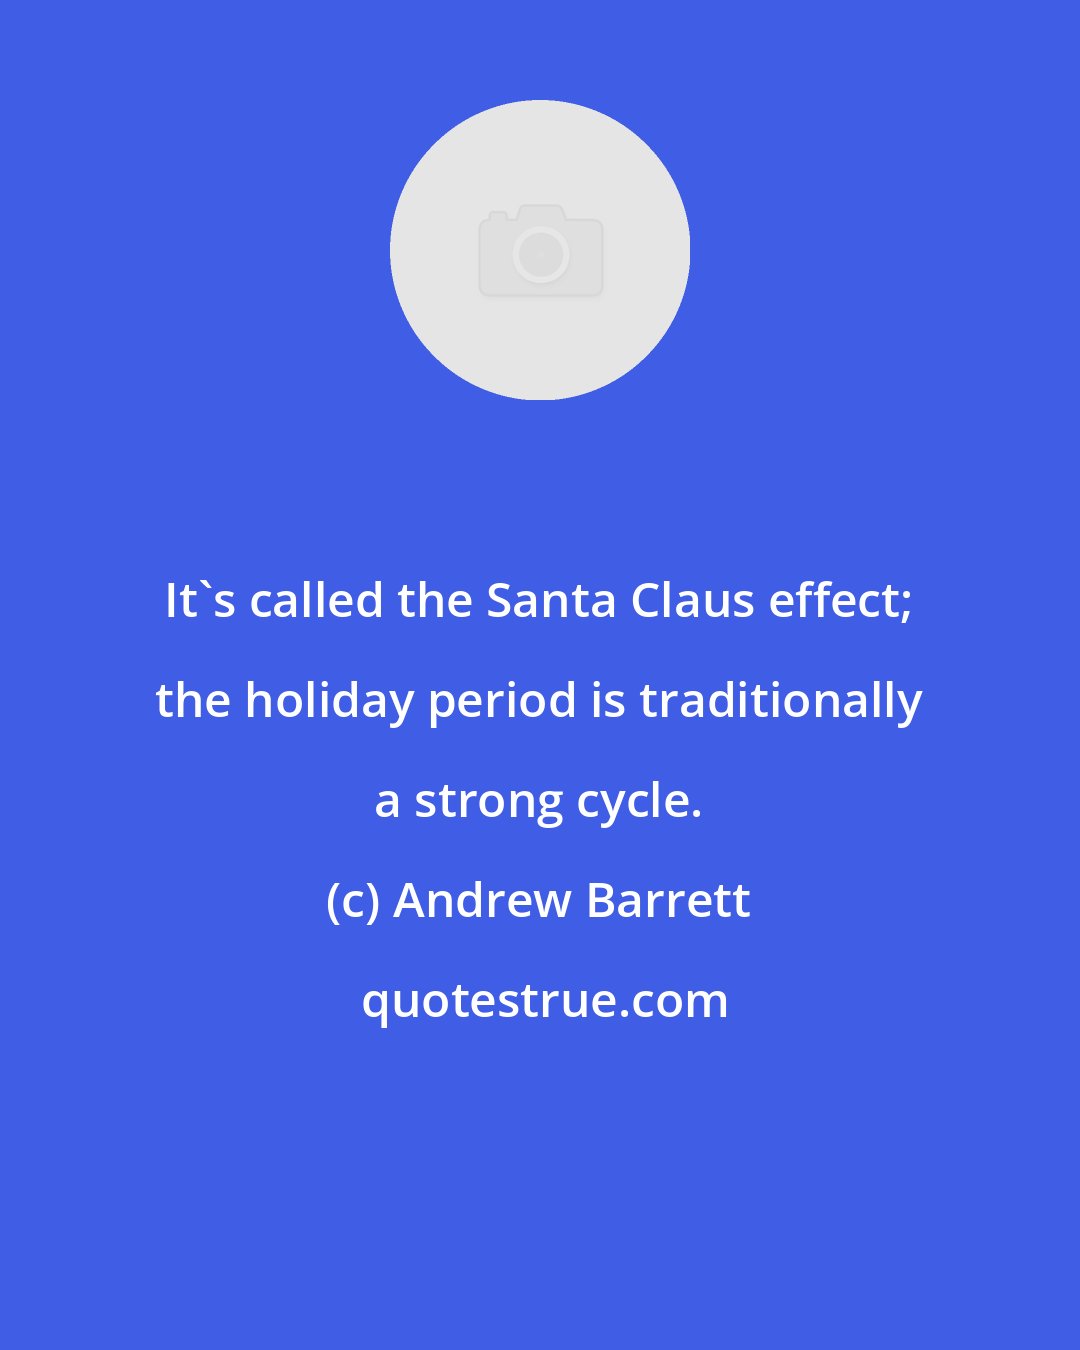 Andrew Barrett: It's called the Santa Claus effect; the holiday period is traditionally a strong cycle.